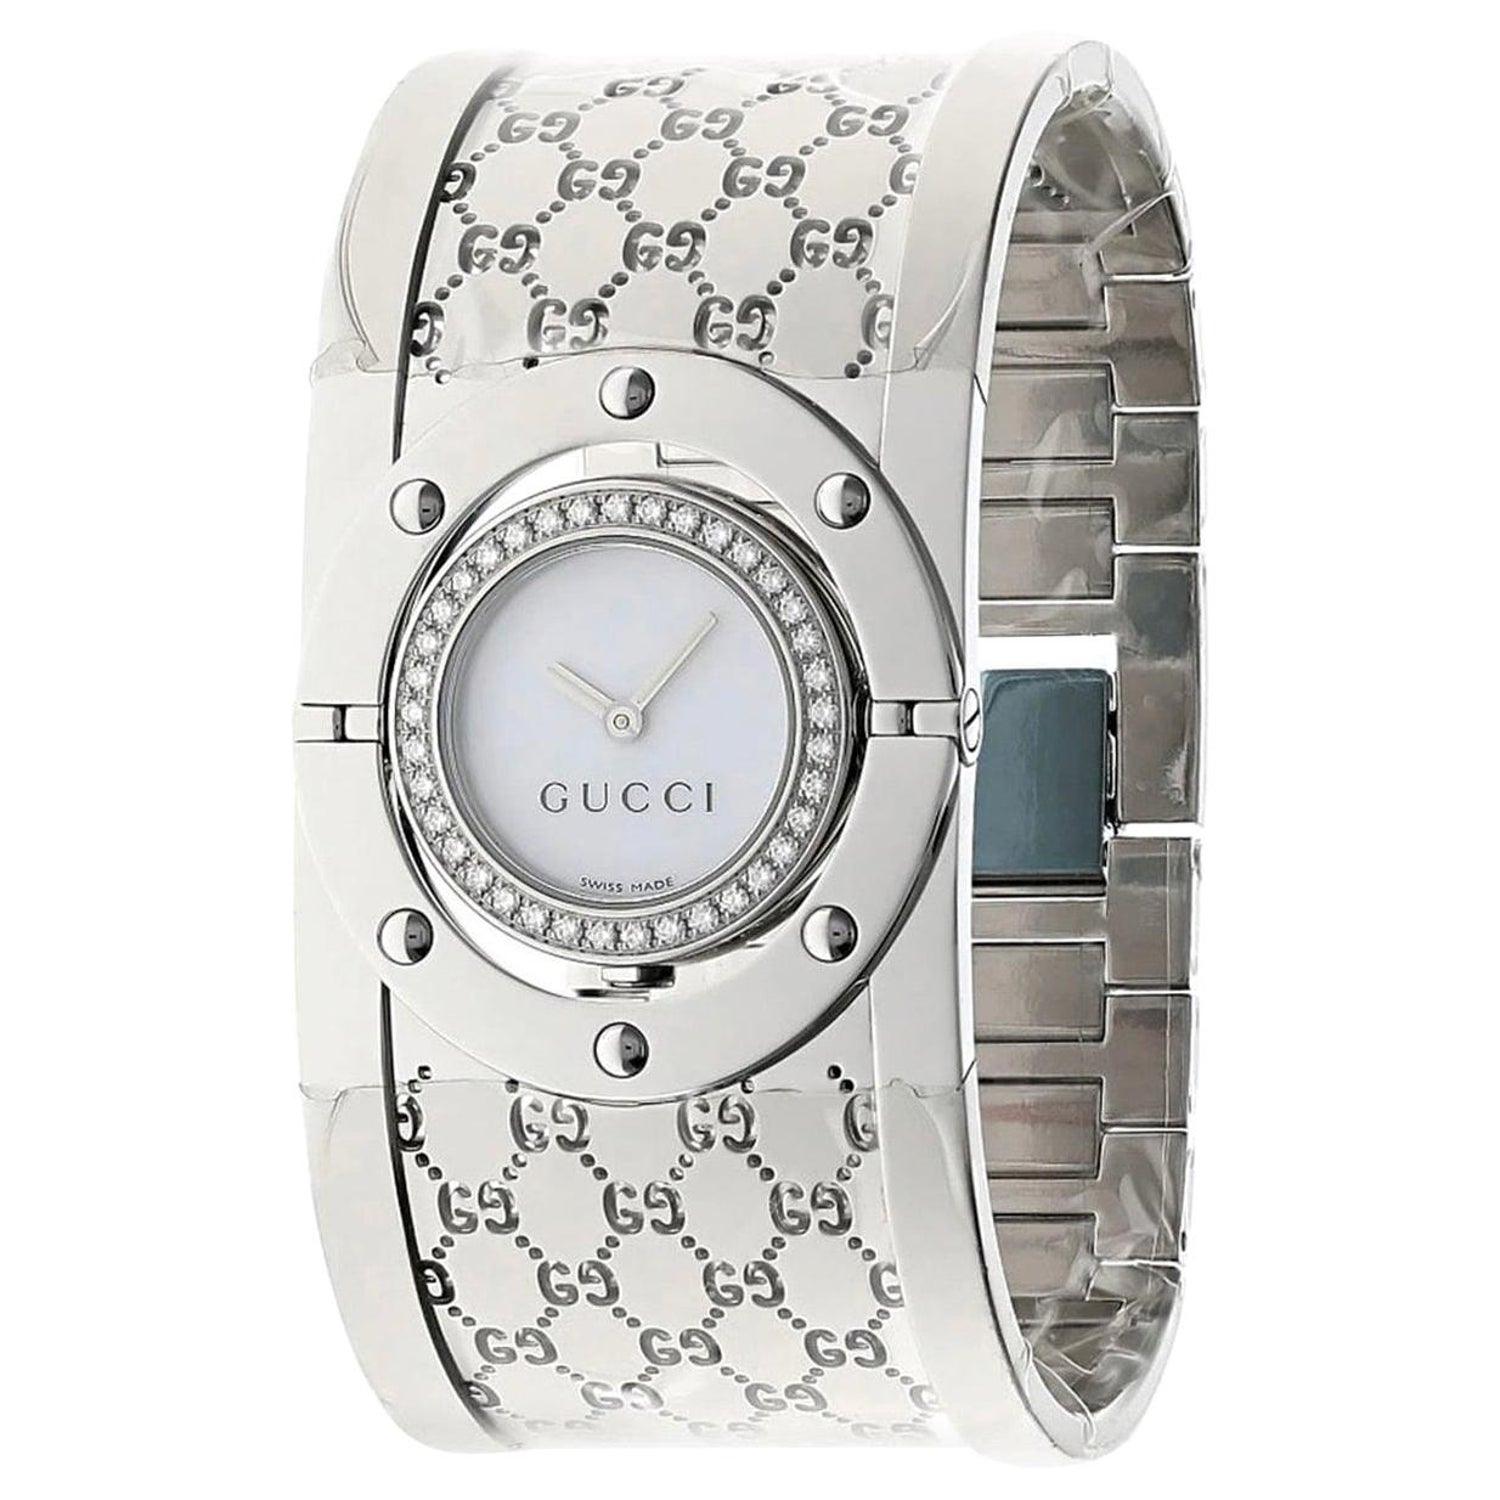 Gucci Twirl Watch - 4 For Sale on 1stDibs | gucci twirl watch price, gucci  twirl watch - ya112434, gucci twirl watch with diamonds